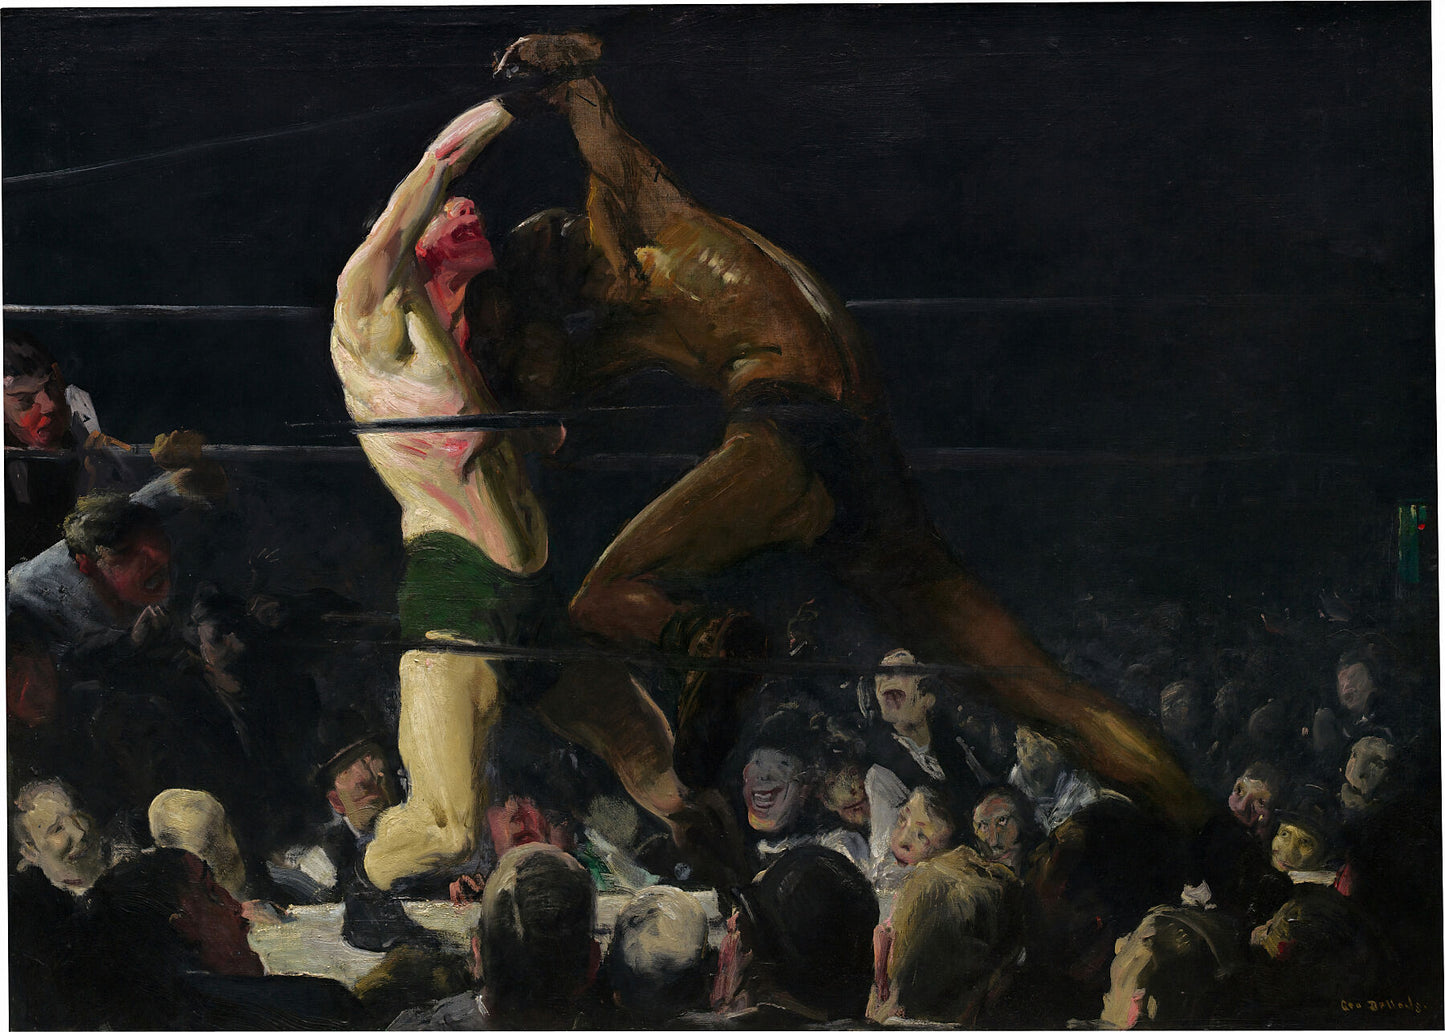 Both Members of This Club by George Bellows - 1909